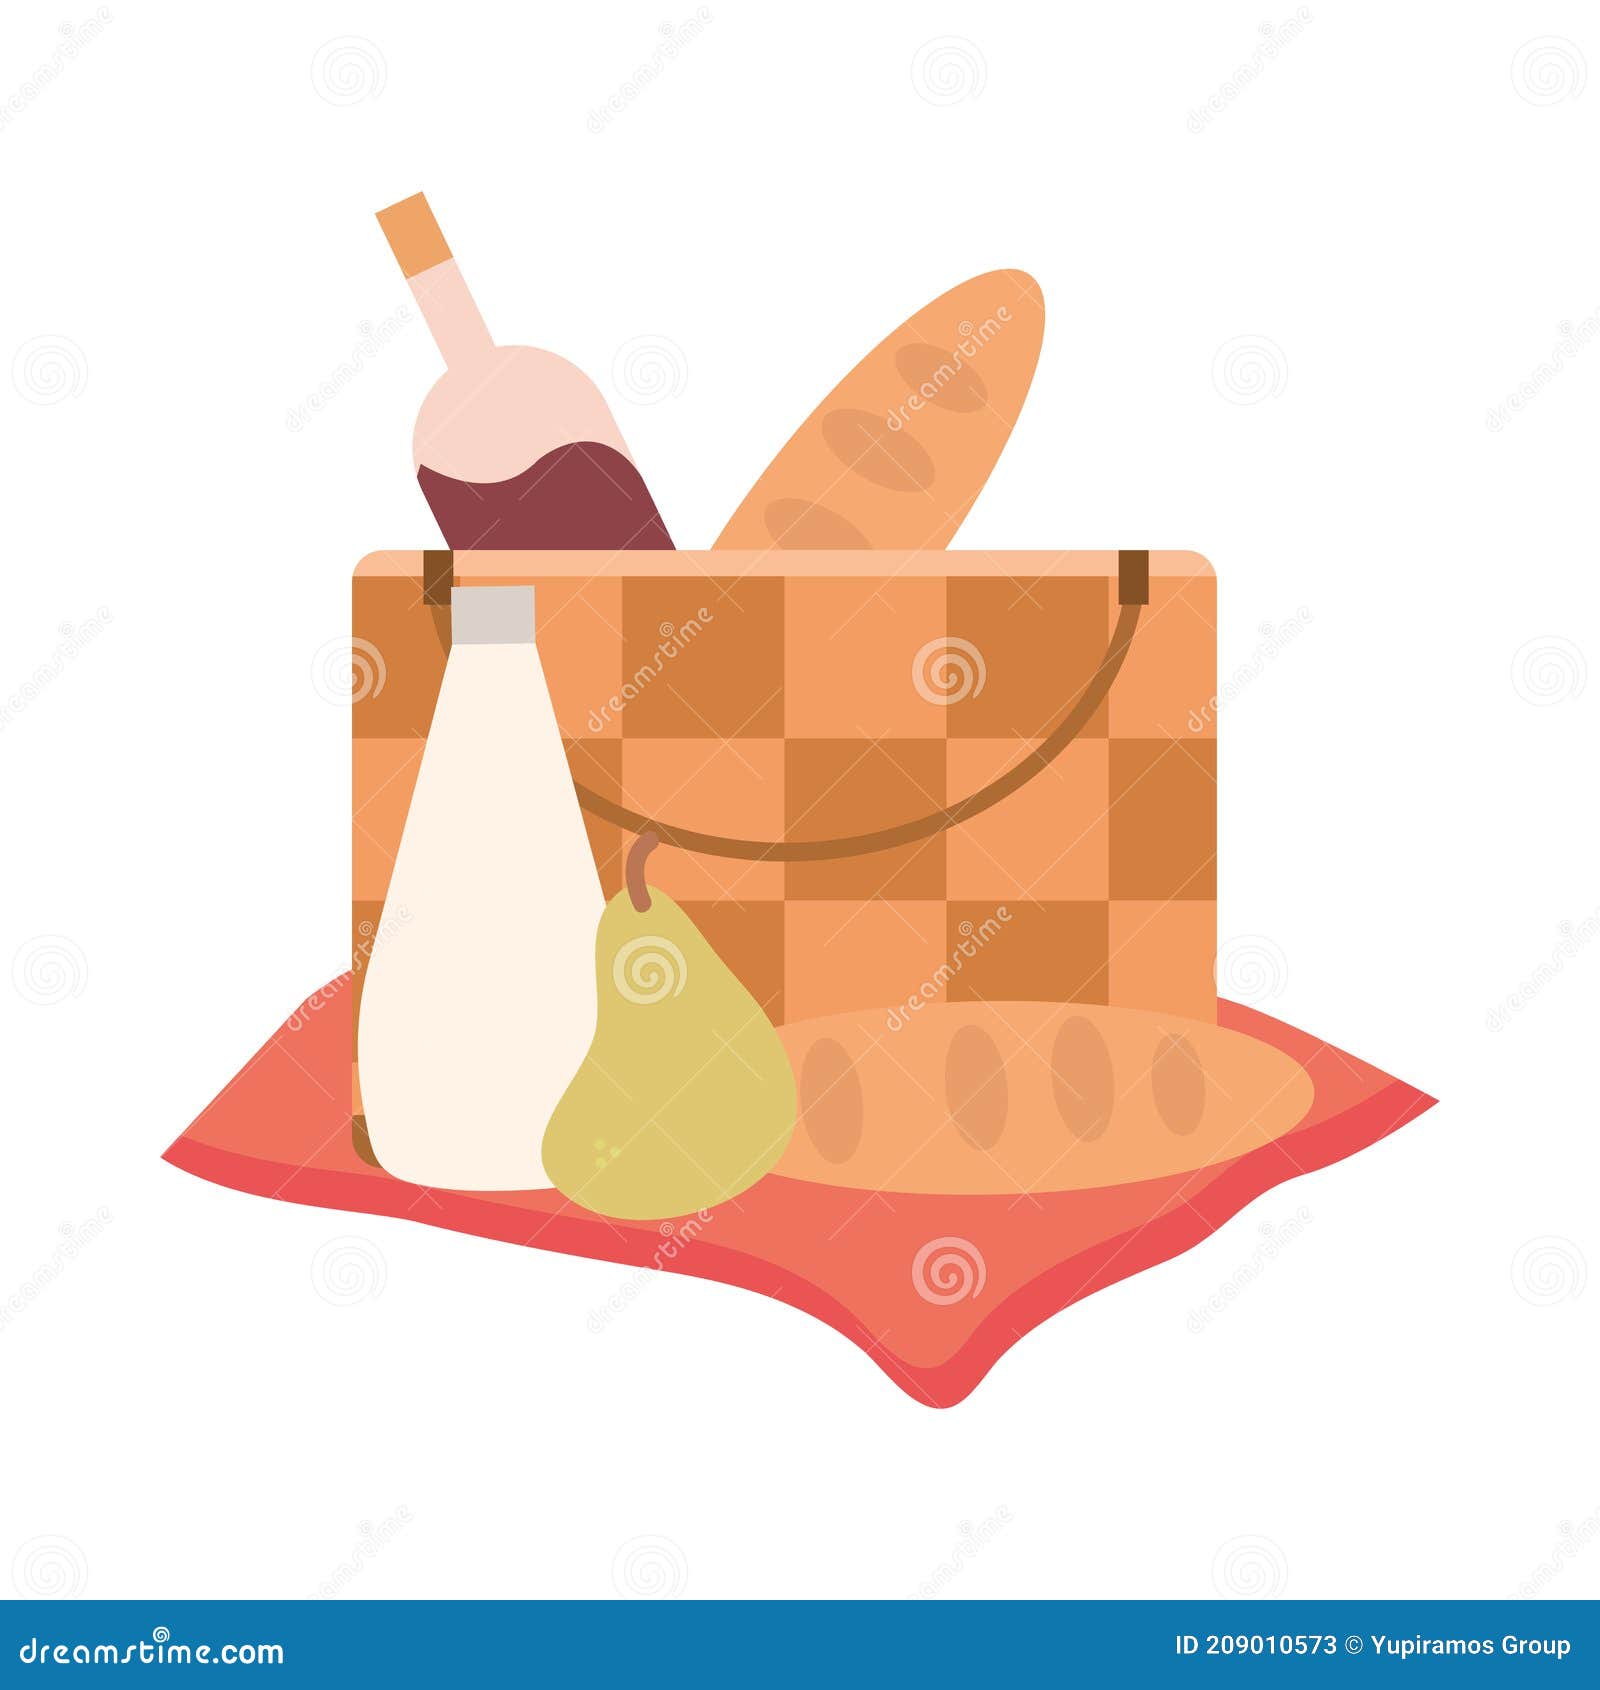 Picnic Basket Wine Bottle Bread Pear And Juice On Blanket Stock Vector